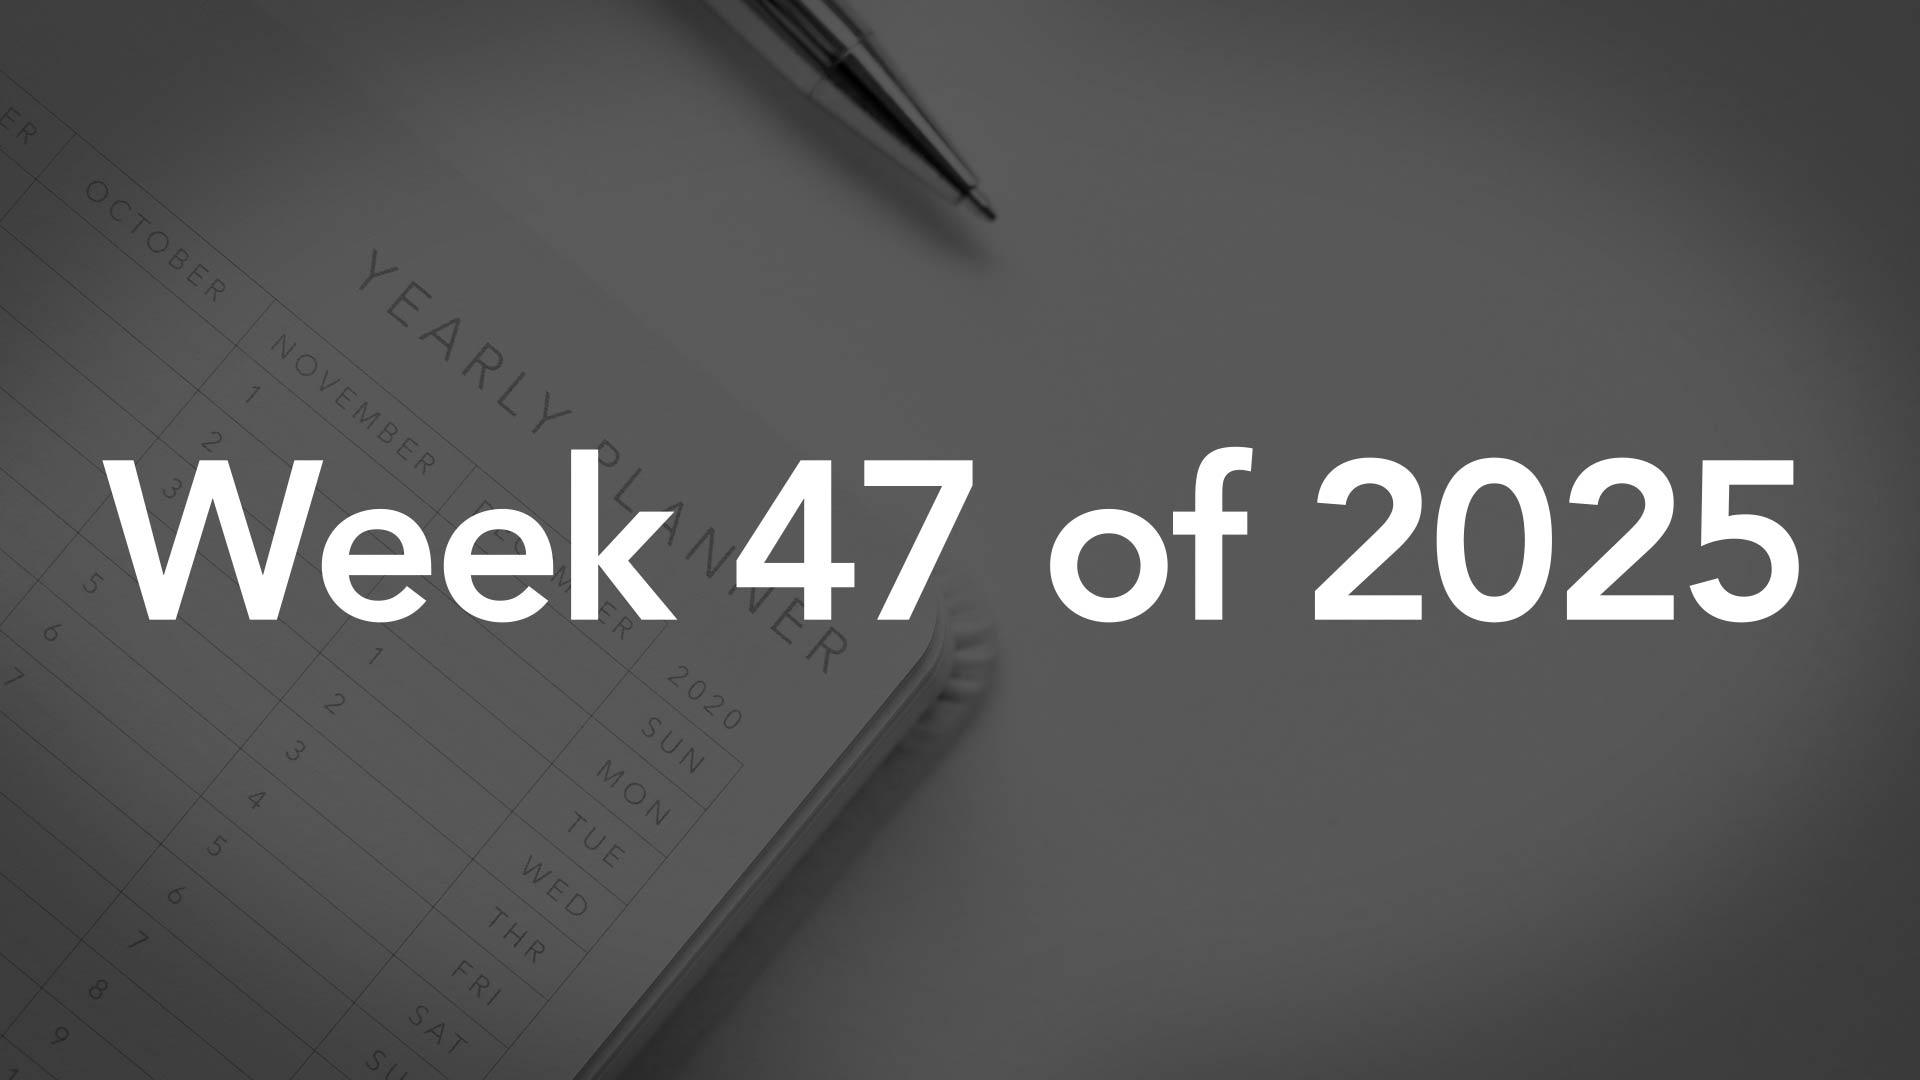 Title Image for Week 47 of 2025